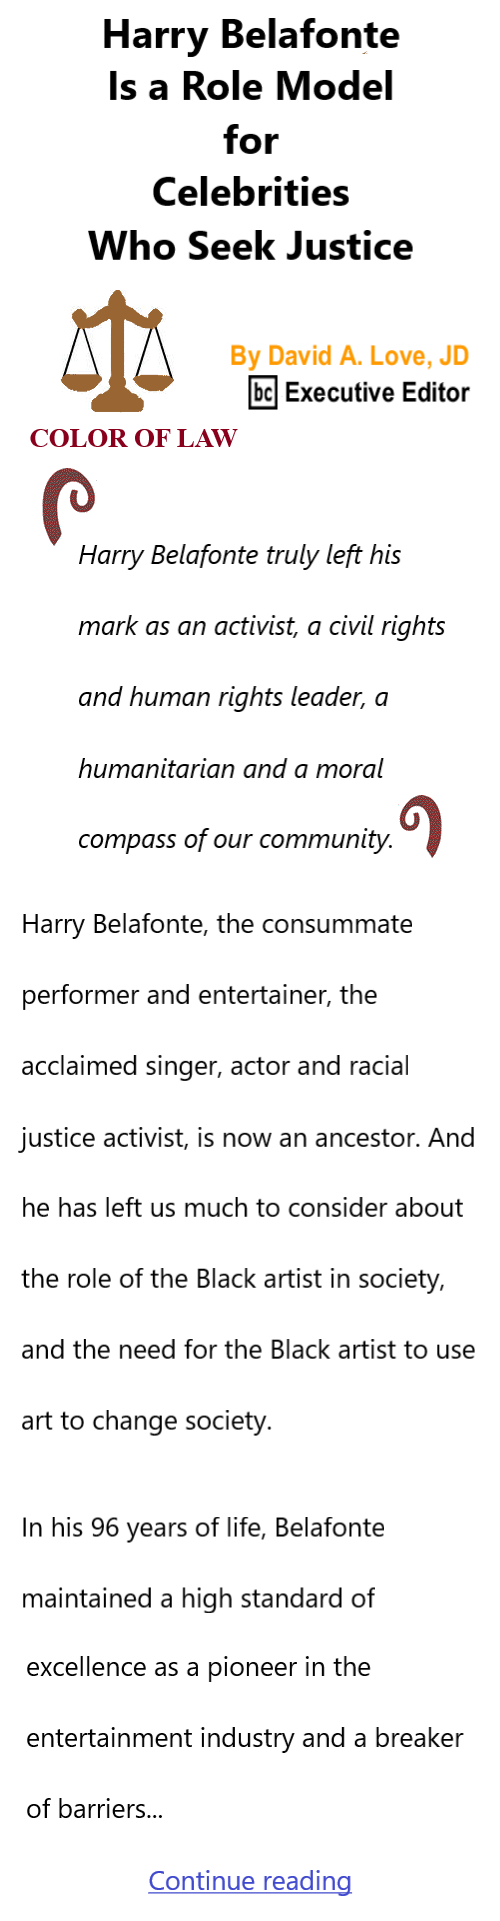 BlackCommentator.com Apr 27, 2023 - Issue 953: Harry Belafonte Is a Role Model for Celebrities Who Seek Justice - Color of Law By David A. Love, JD, BC Executive Editor